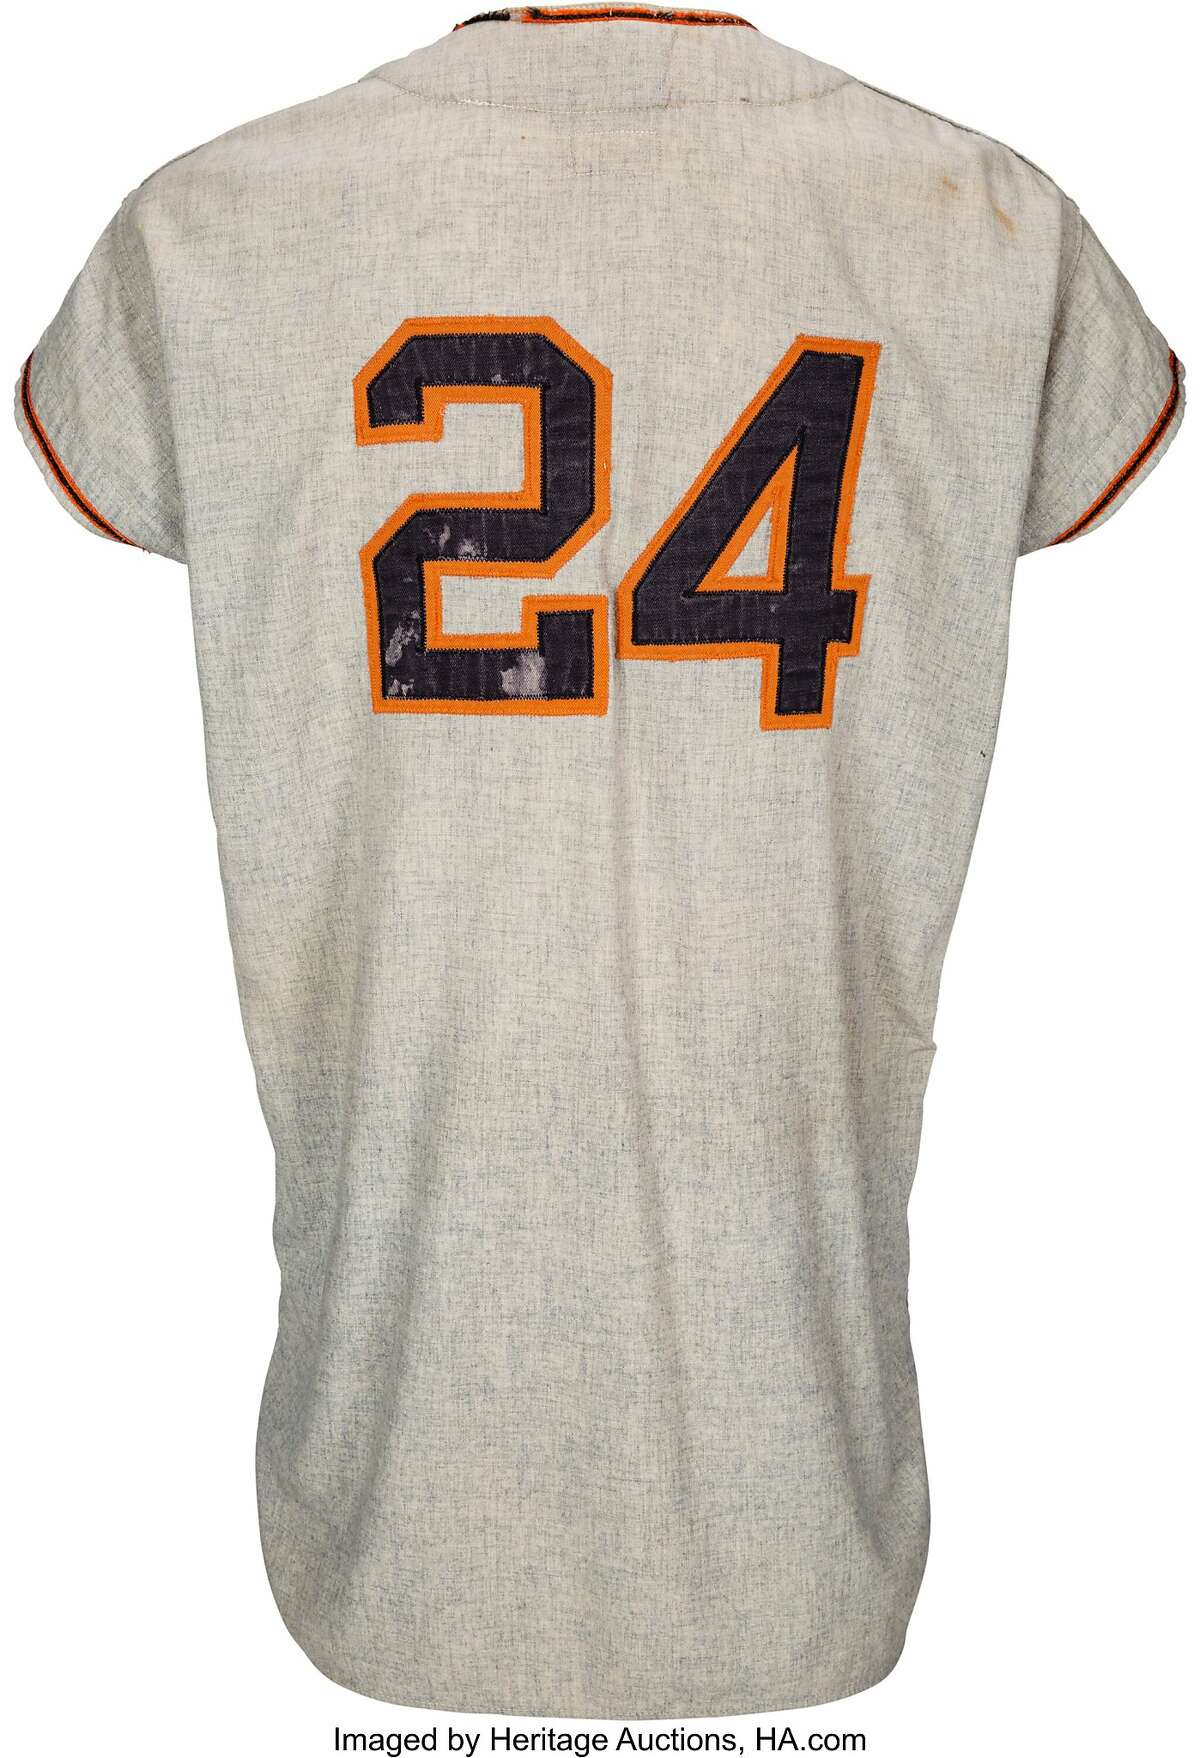 A jersey worn by Willie Mays during Giants' first year in S.F. is up for  auction and expected to fetch $60,000